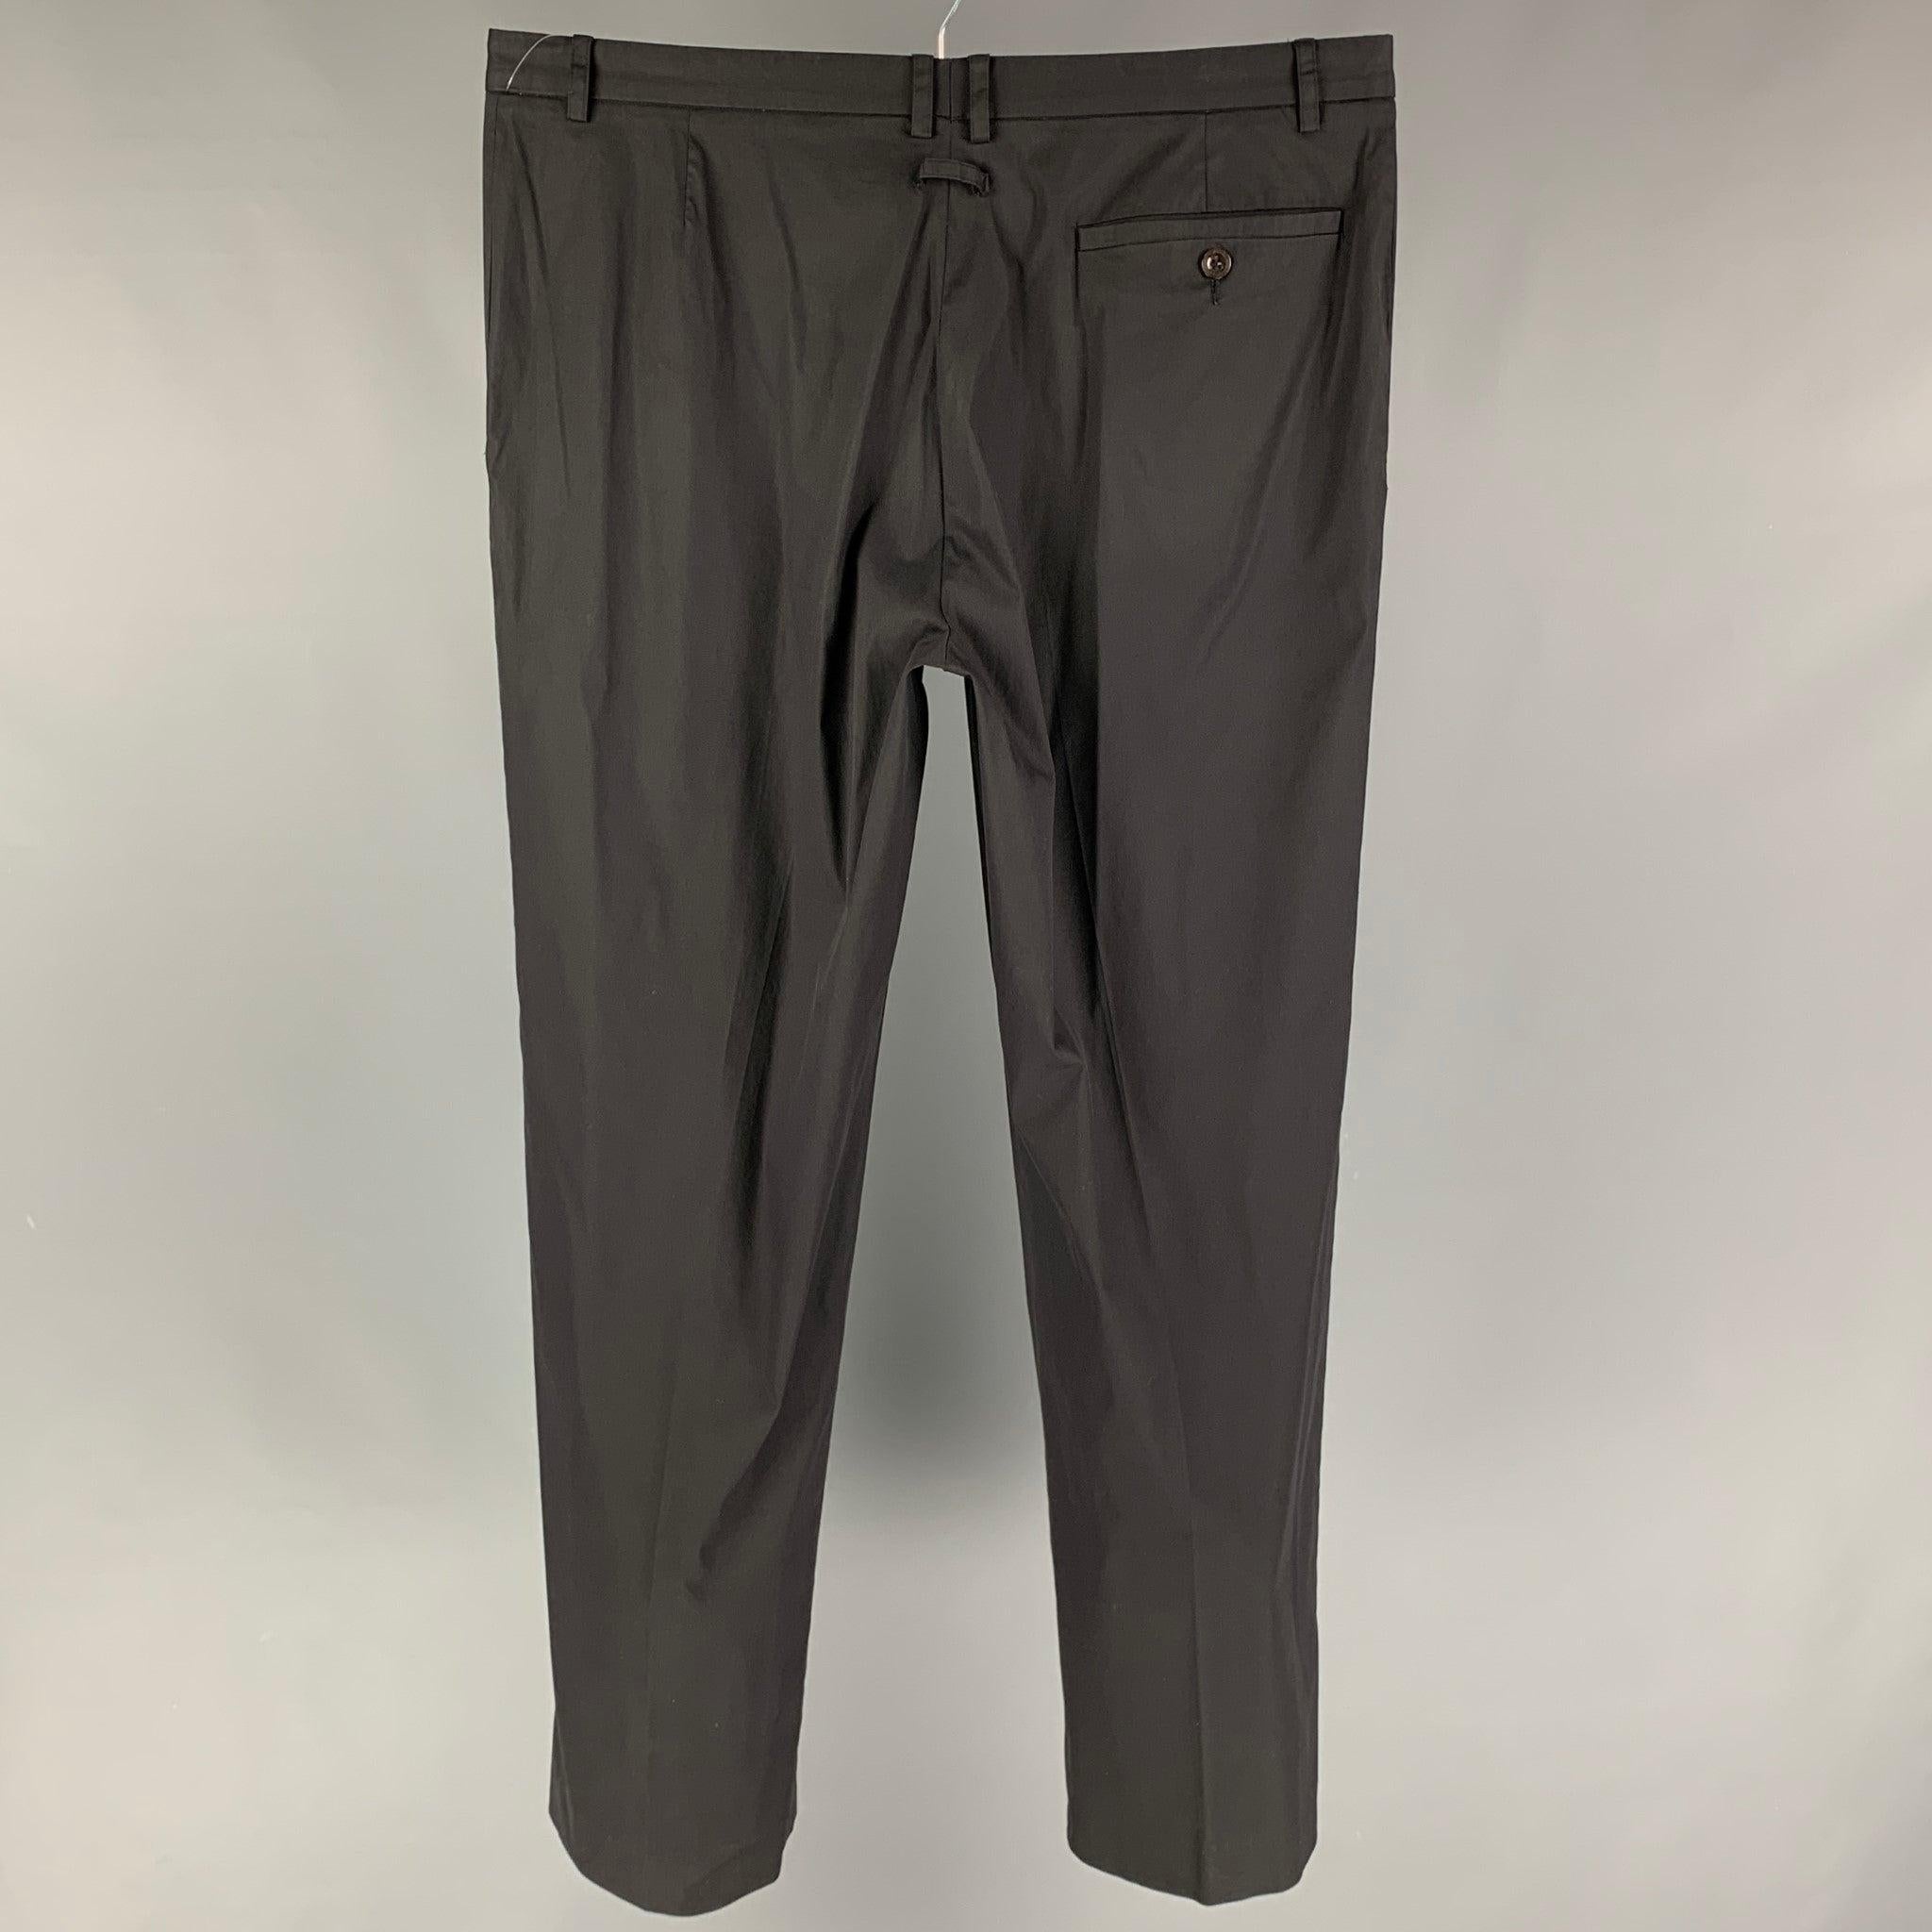 Vintage JEAN PAUL GAULTIER dress pants comes in a black wool / polyester featuring a flat front, front tab, and a zip fly closure.
Very Good
Pre-Owned Condition. 

Marked:   I 52 / E 52 / GB 42 / USA 36 

Measurements: 
  Waist: 36 inches  Rise: